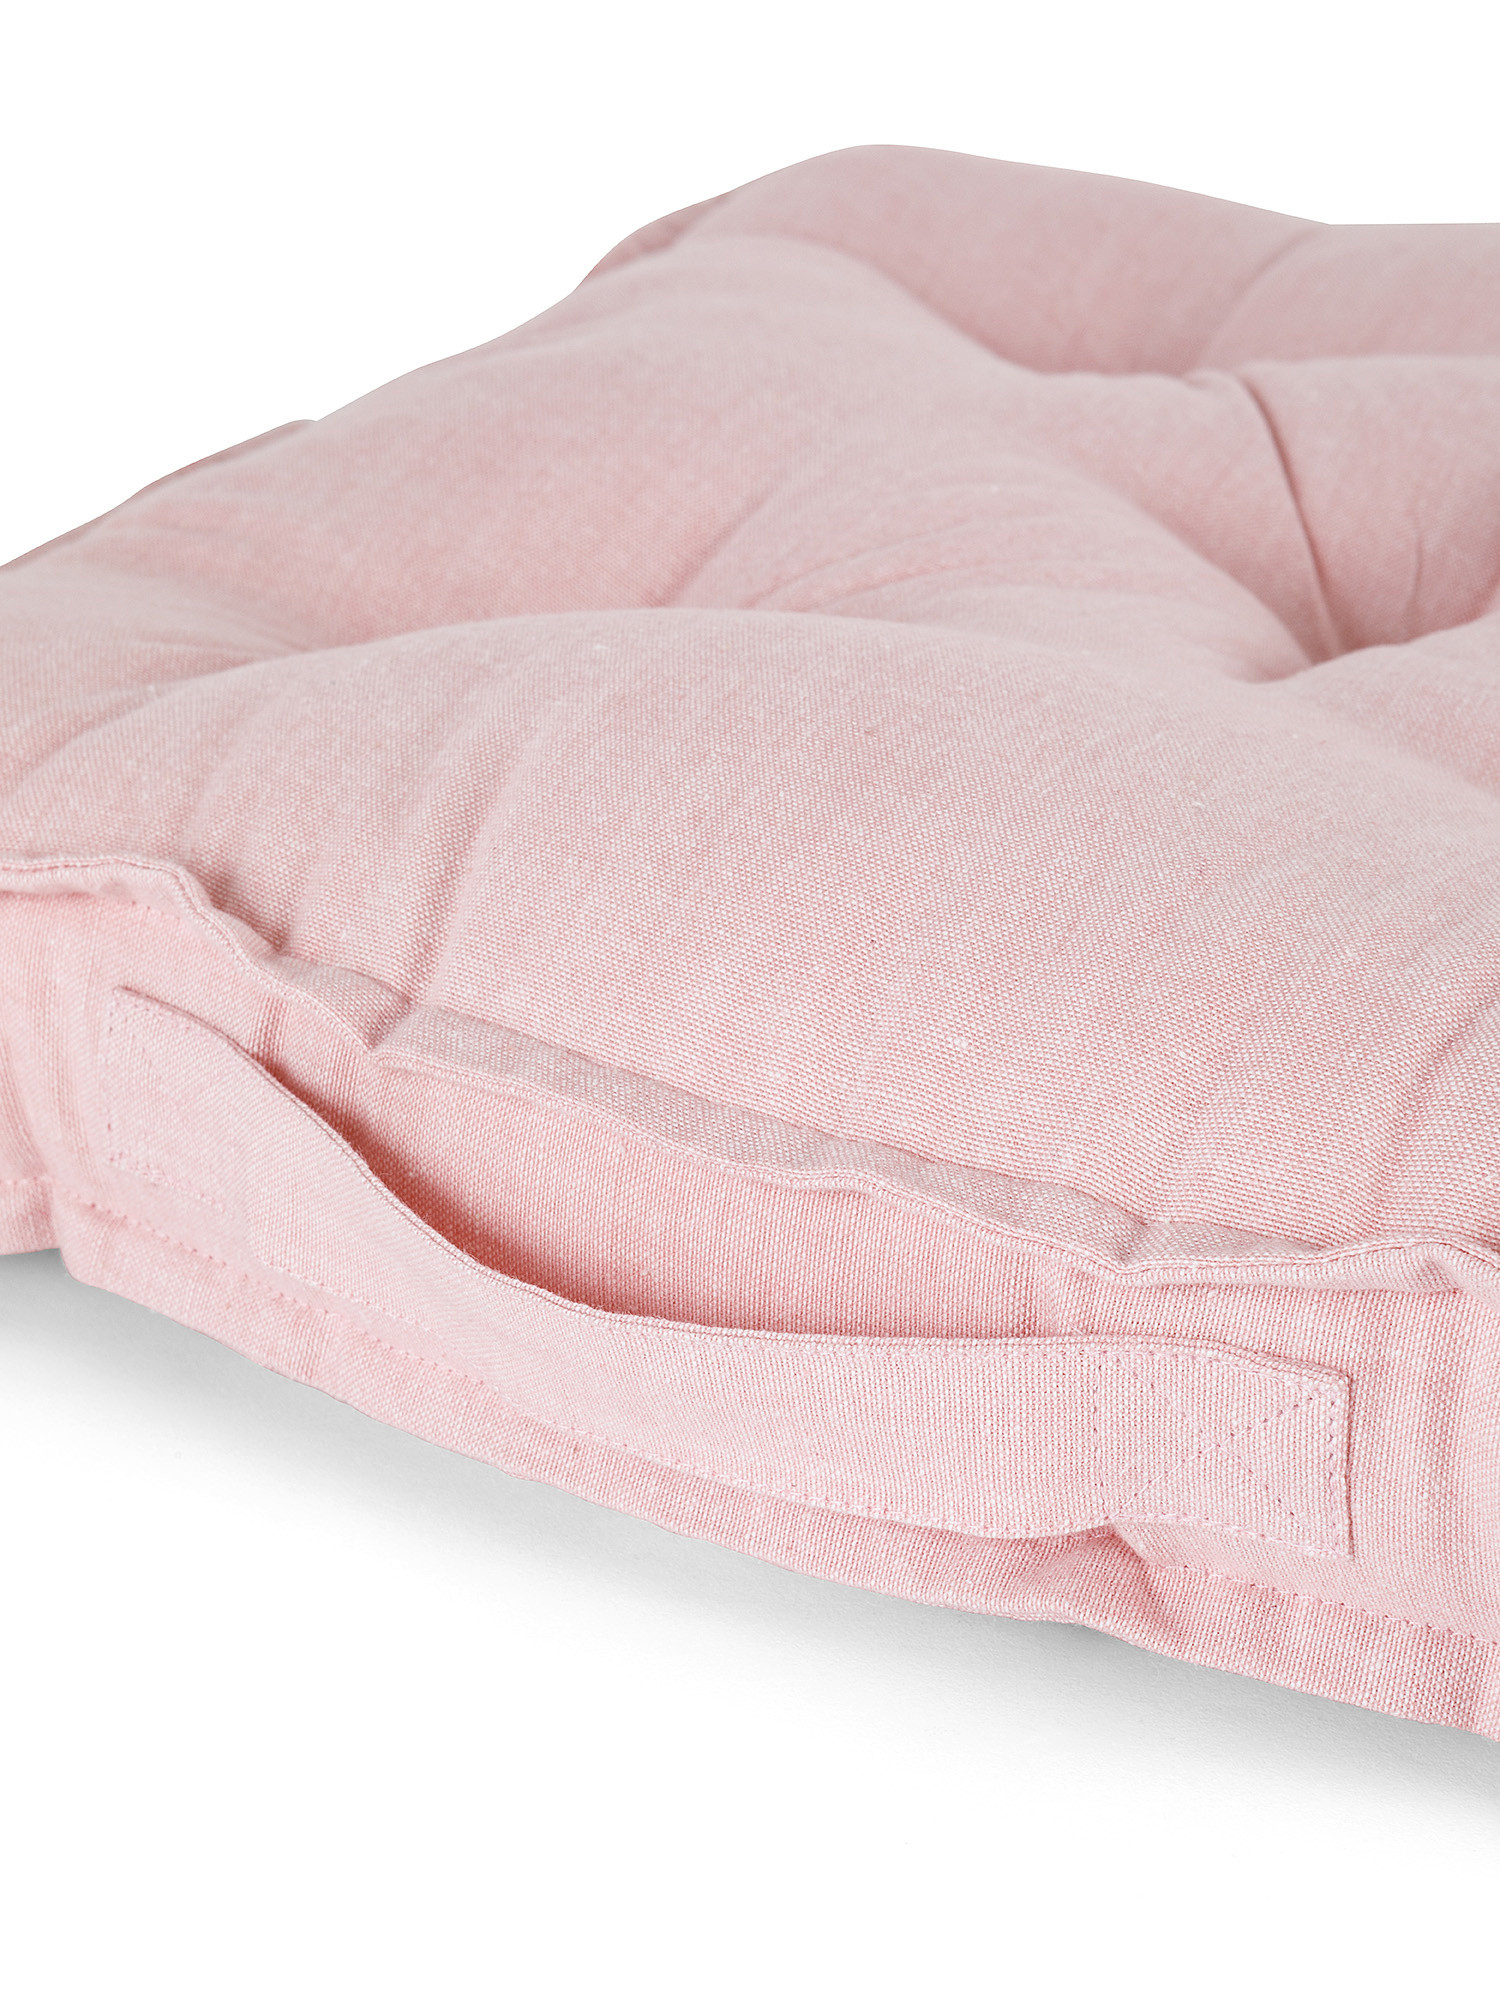 Solid color mattress cushion 50x50cm, Pink, large image number 1